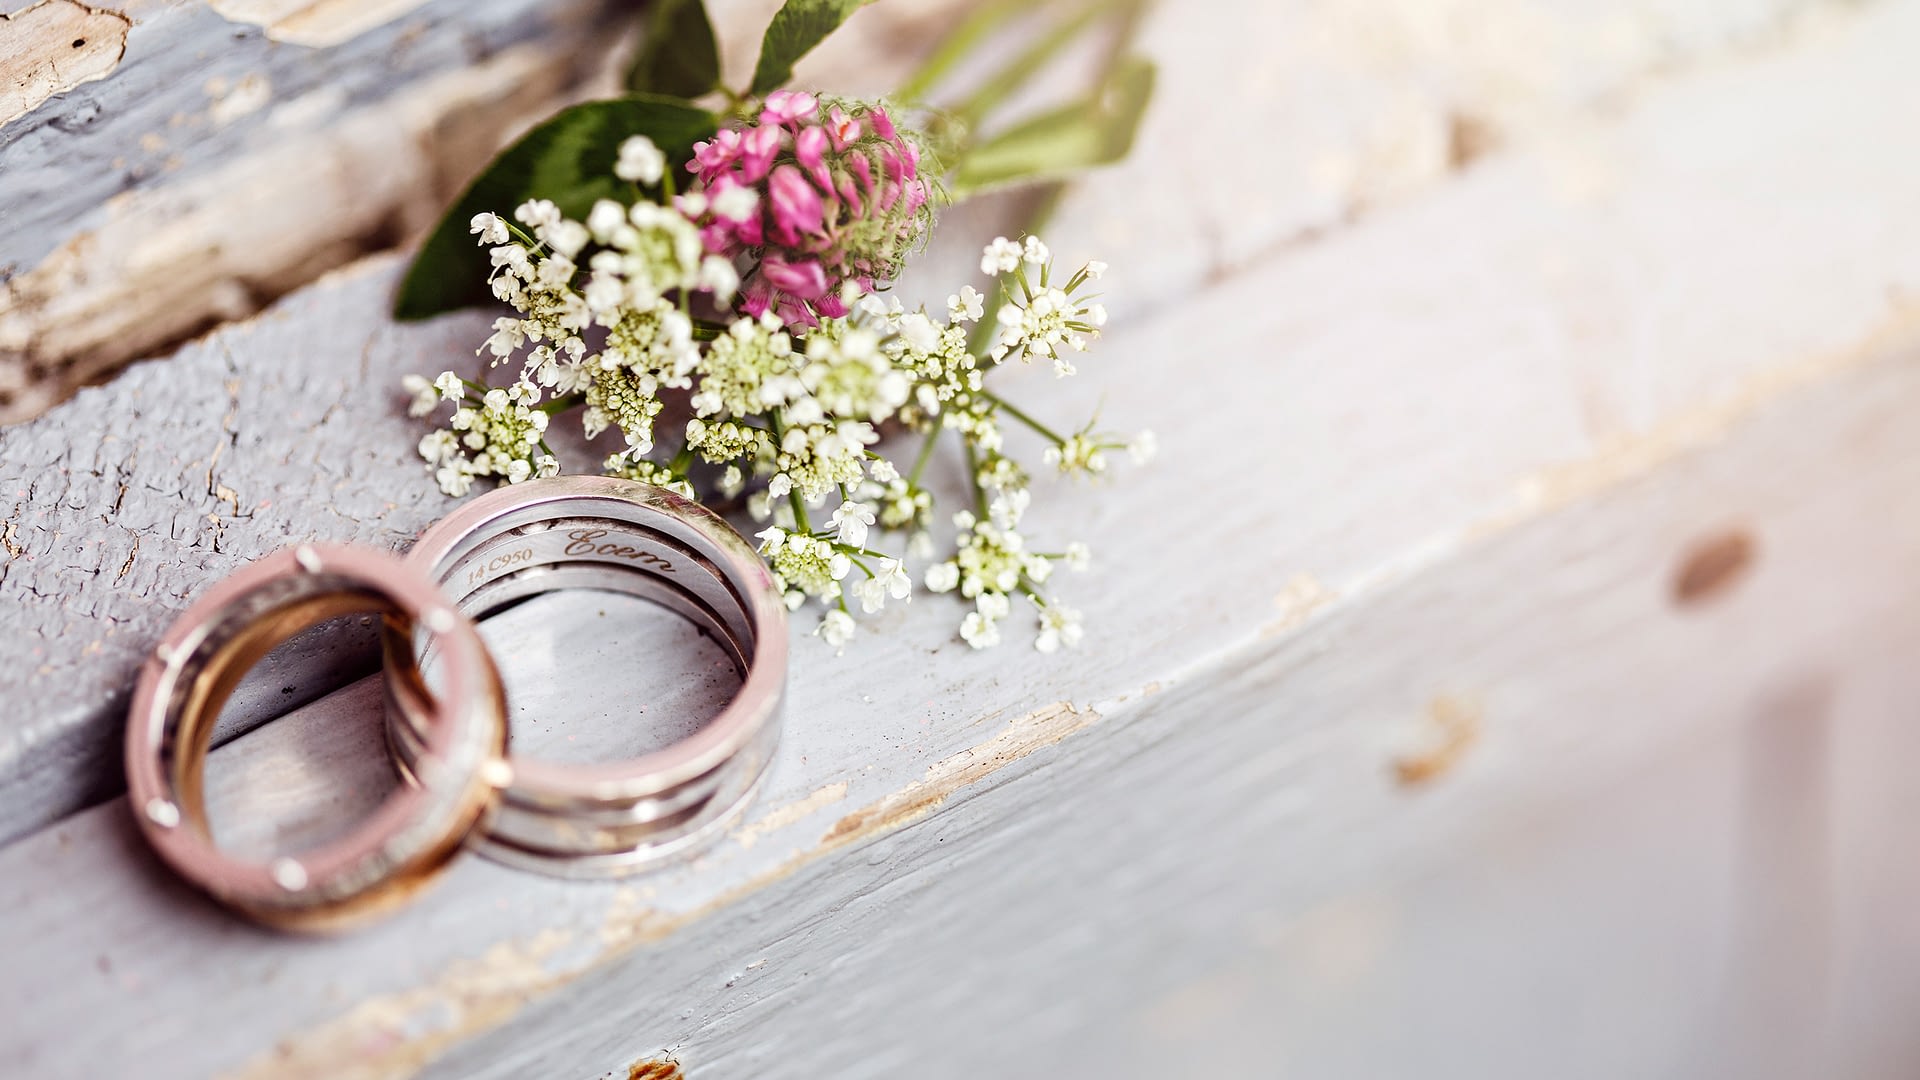 Two wedding bands next to decorative flowers.